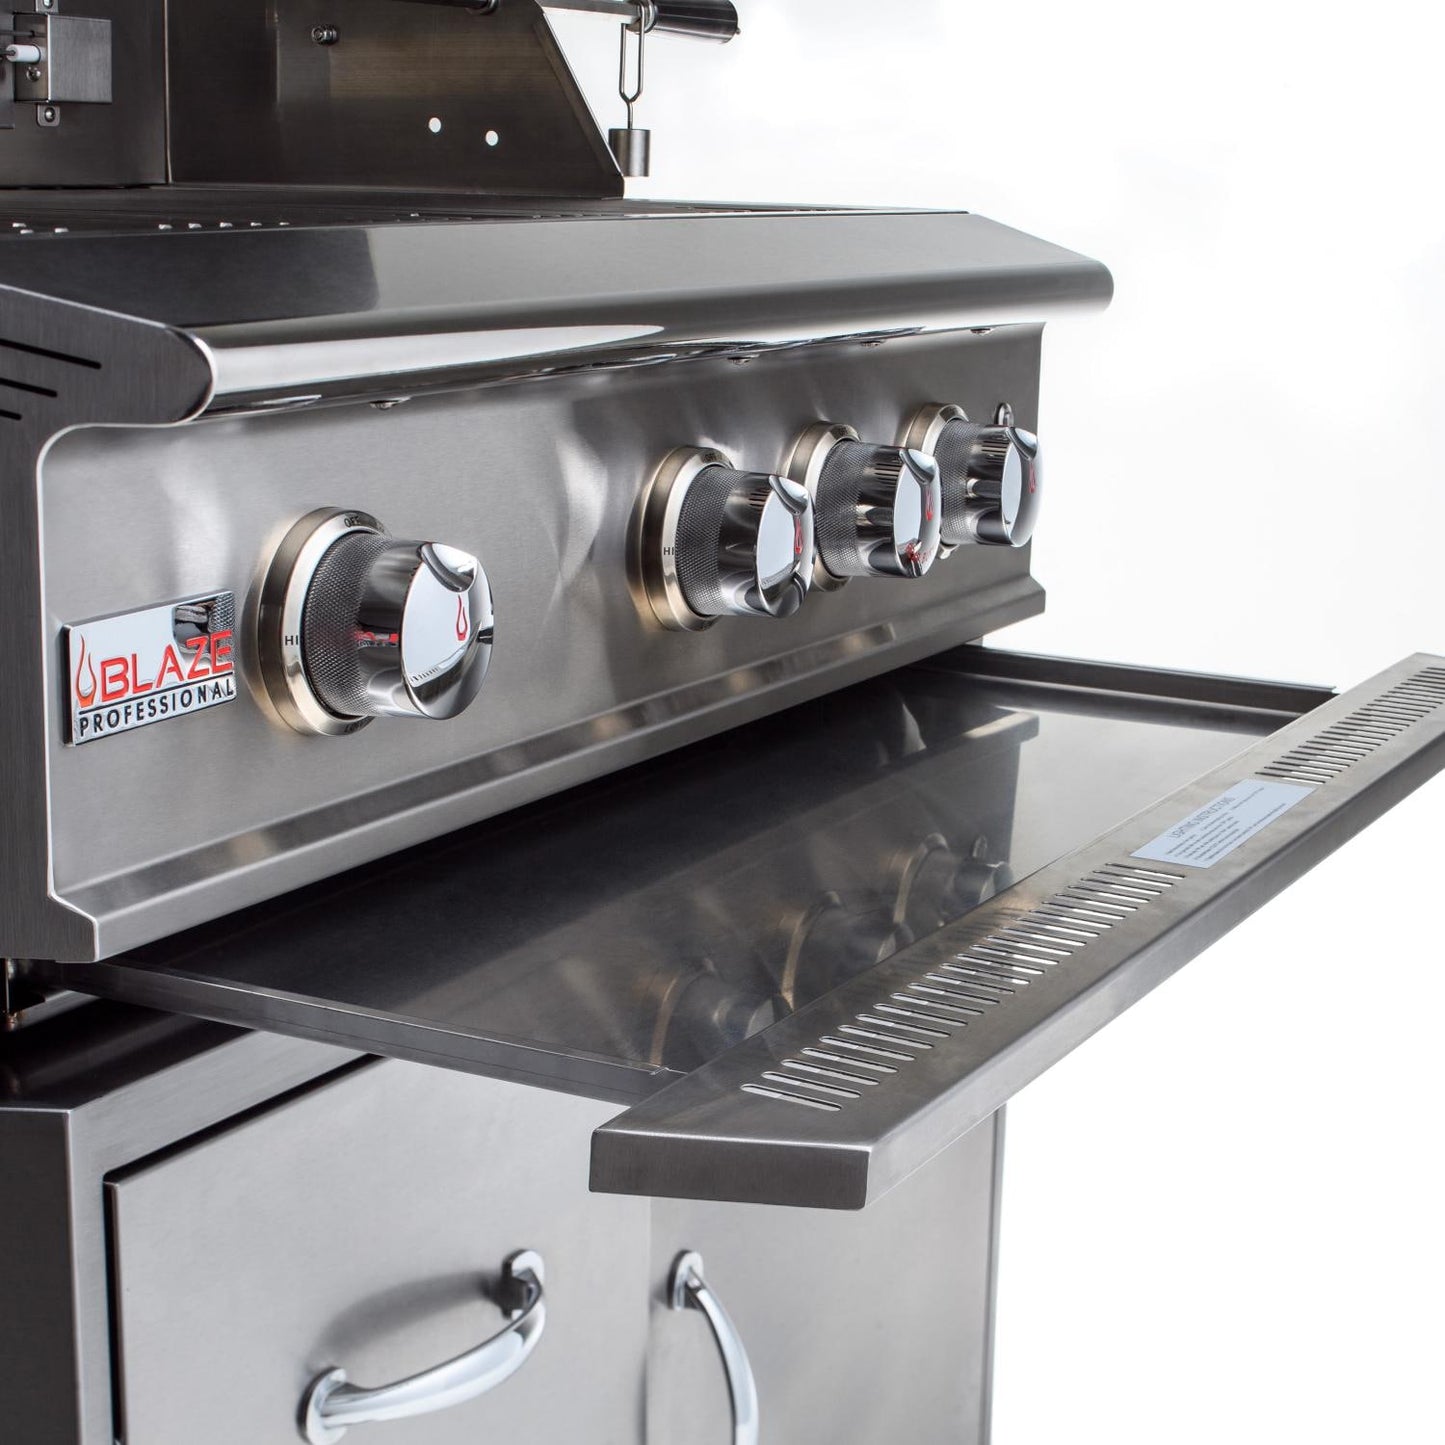 Blaze 3 Burner Professional 34" Gas Grill - FREE GIFT WITH PURCHASE!